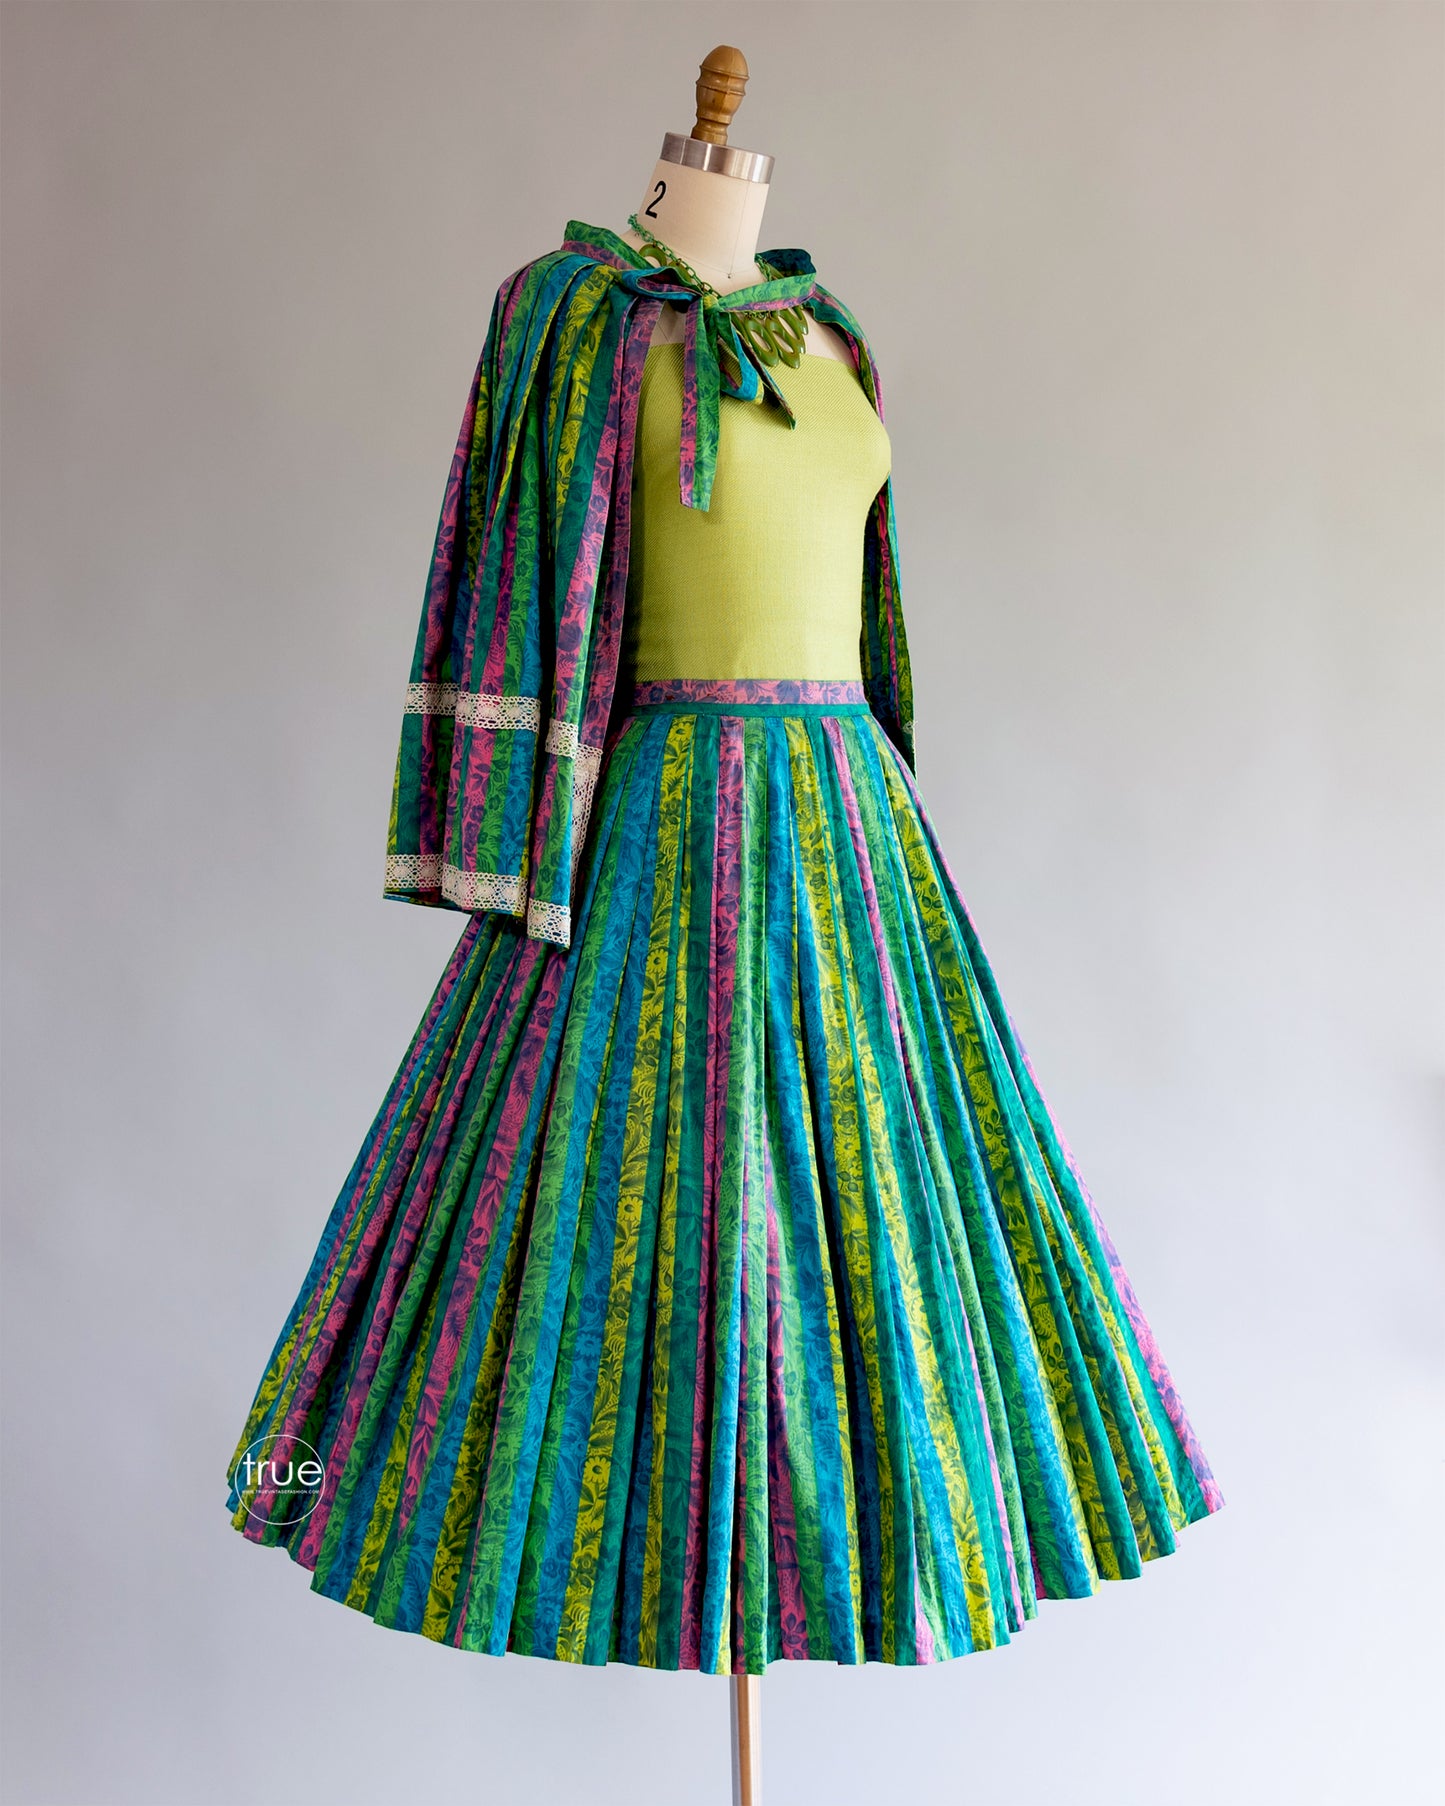 vintage 1950's skirt ...fabulous RAINBOW floral full CIRCLE skirt & cape/cover-up